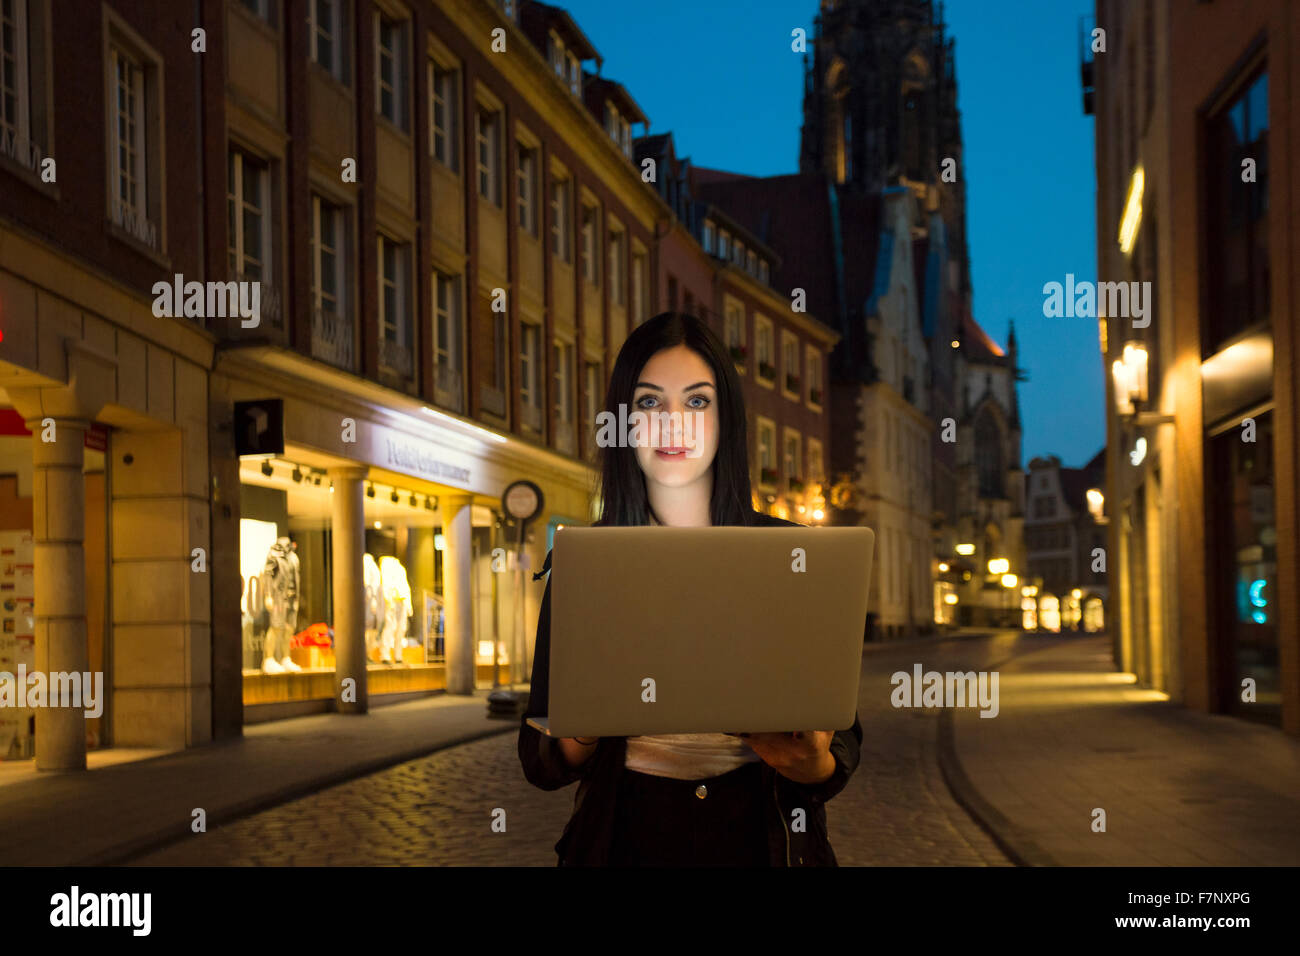 Germany, Muenster, portrait of young woman with laptop in the city at evening Stock Photo